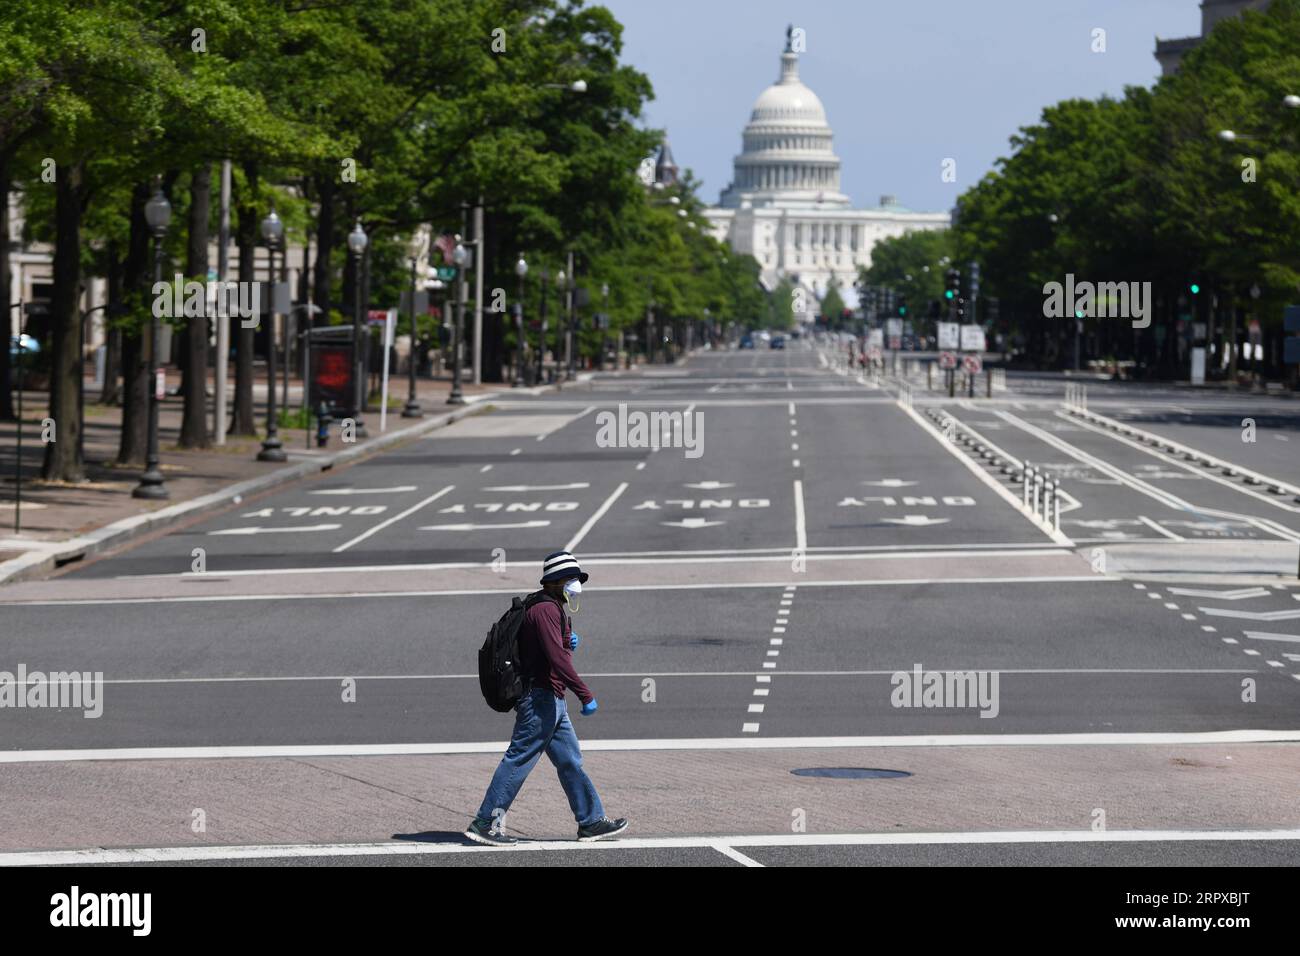 200516 -- WASHINGTON D.C., May 16, 2020 -- A man wearing a face mask crosses a street near the U.S. Capitol building in Washington D.C., the United States, May 15, 2020. U.S. House of Representatives on Friday passed a 3-trillion-U.S.-dollar coronavirus relief package, which was proposed by Democrats but not likely to gain approval from Republican-held Senate.  U.S.-WASHINGTON D.C.-COVID-19-RELIEF PACKAGE LiuxJie PUBLICATIONxNOTxINxCHN Stock Photo